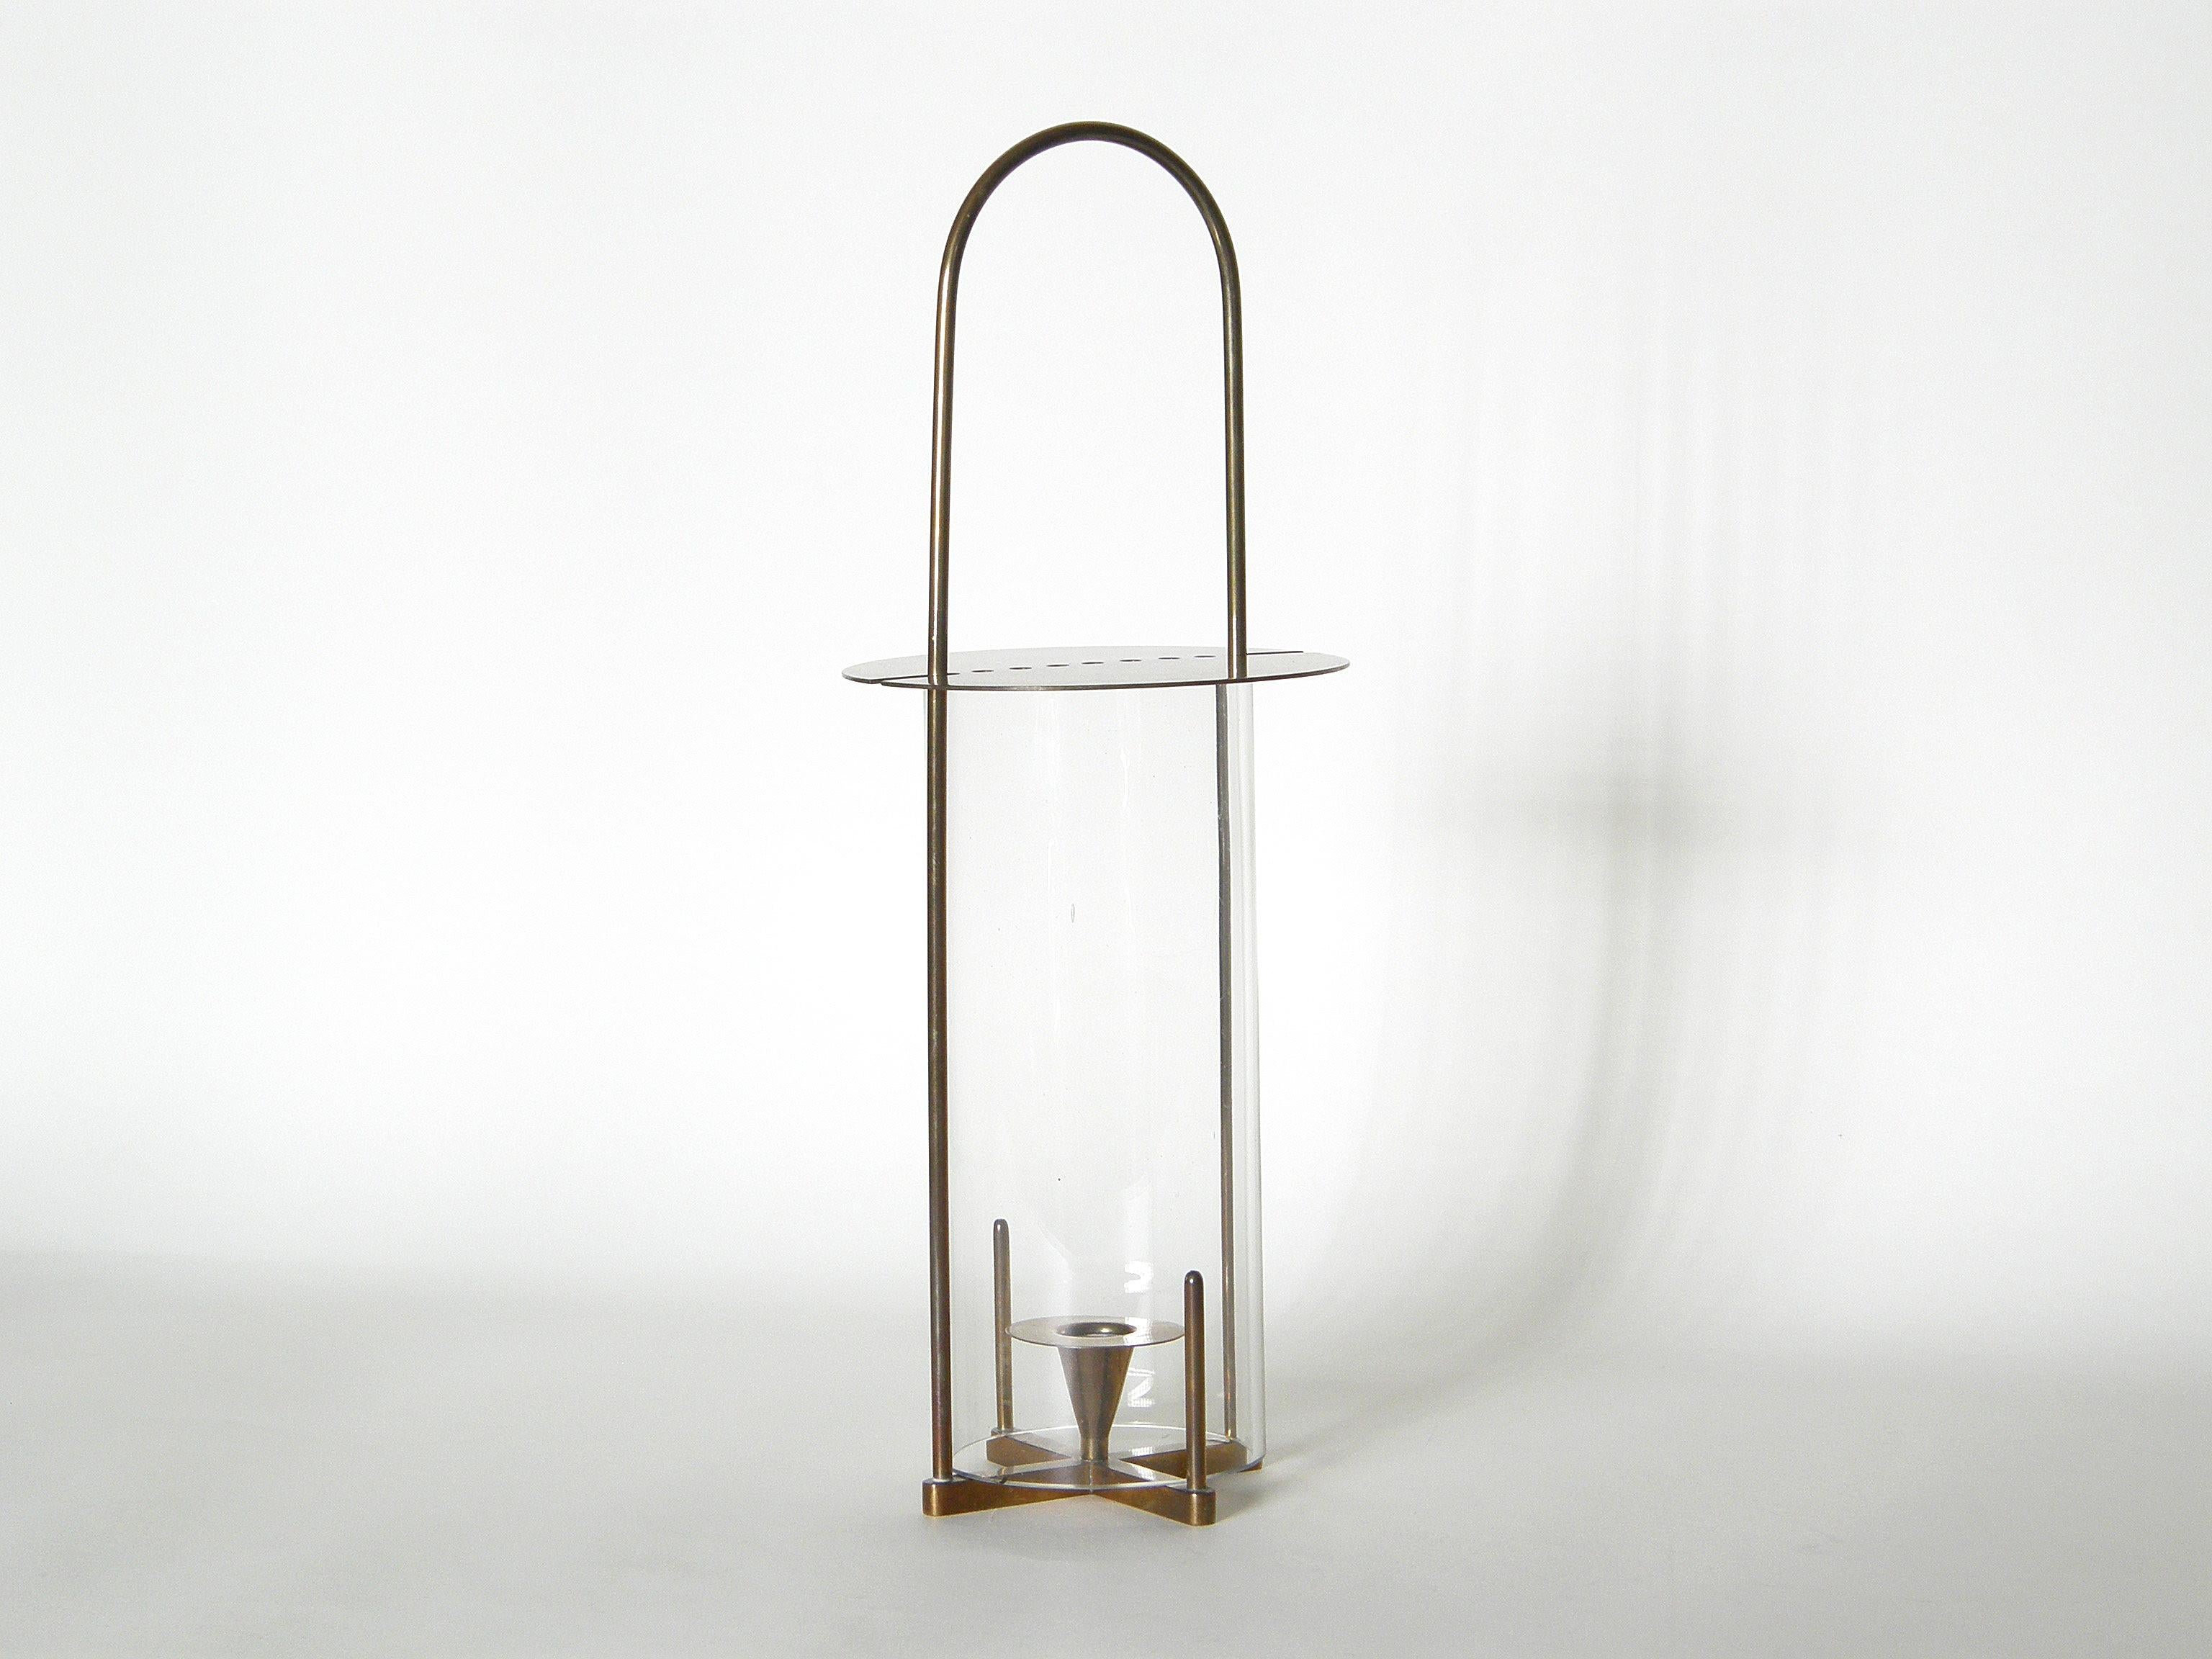 This Carl Auböck candle lantern has a hurricane type, cylindrical glass shade. The top of the brass frame forms a handle, and the brass cap has a line of small holes to allow air flow for the candle.

The height given is to the top of the